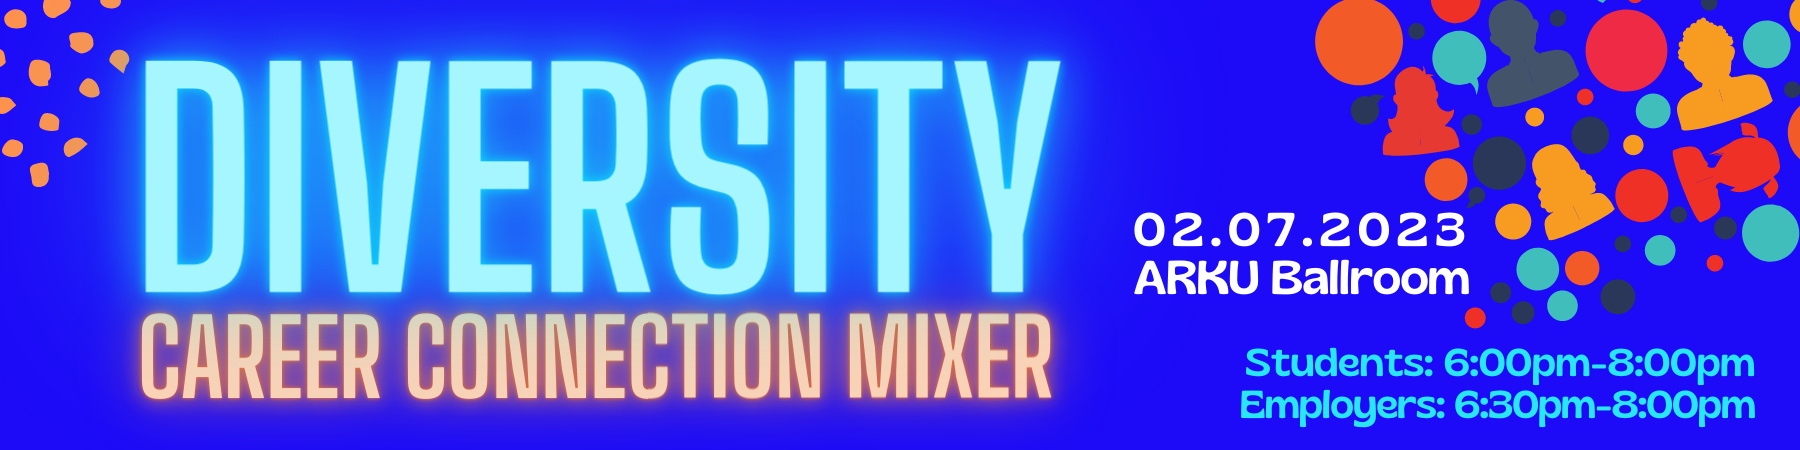 Diversity Career Connection Mixer, Tuesday, February 7, 2023 from 6:00pm-8:00pm.